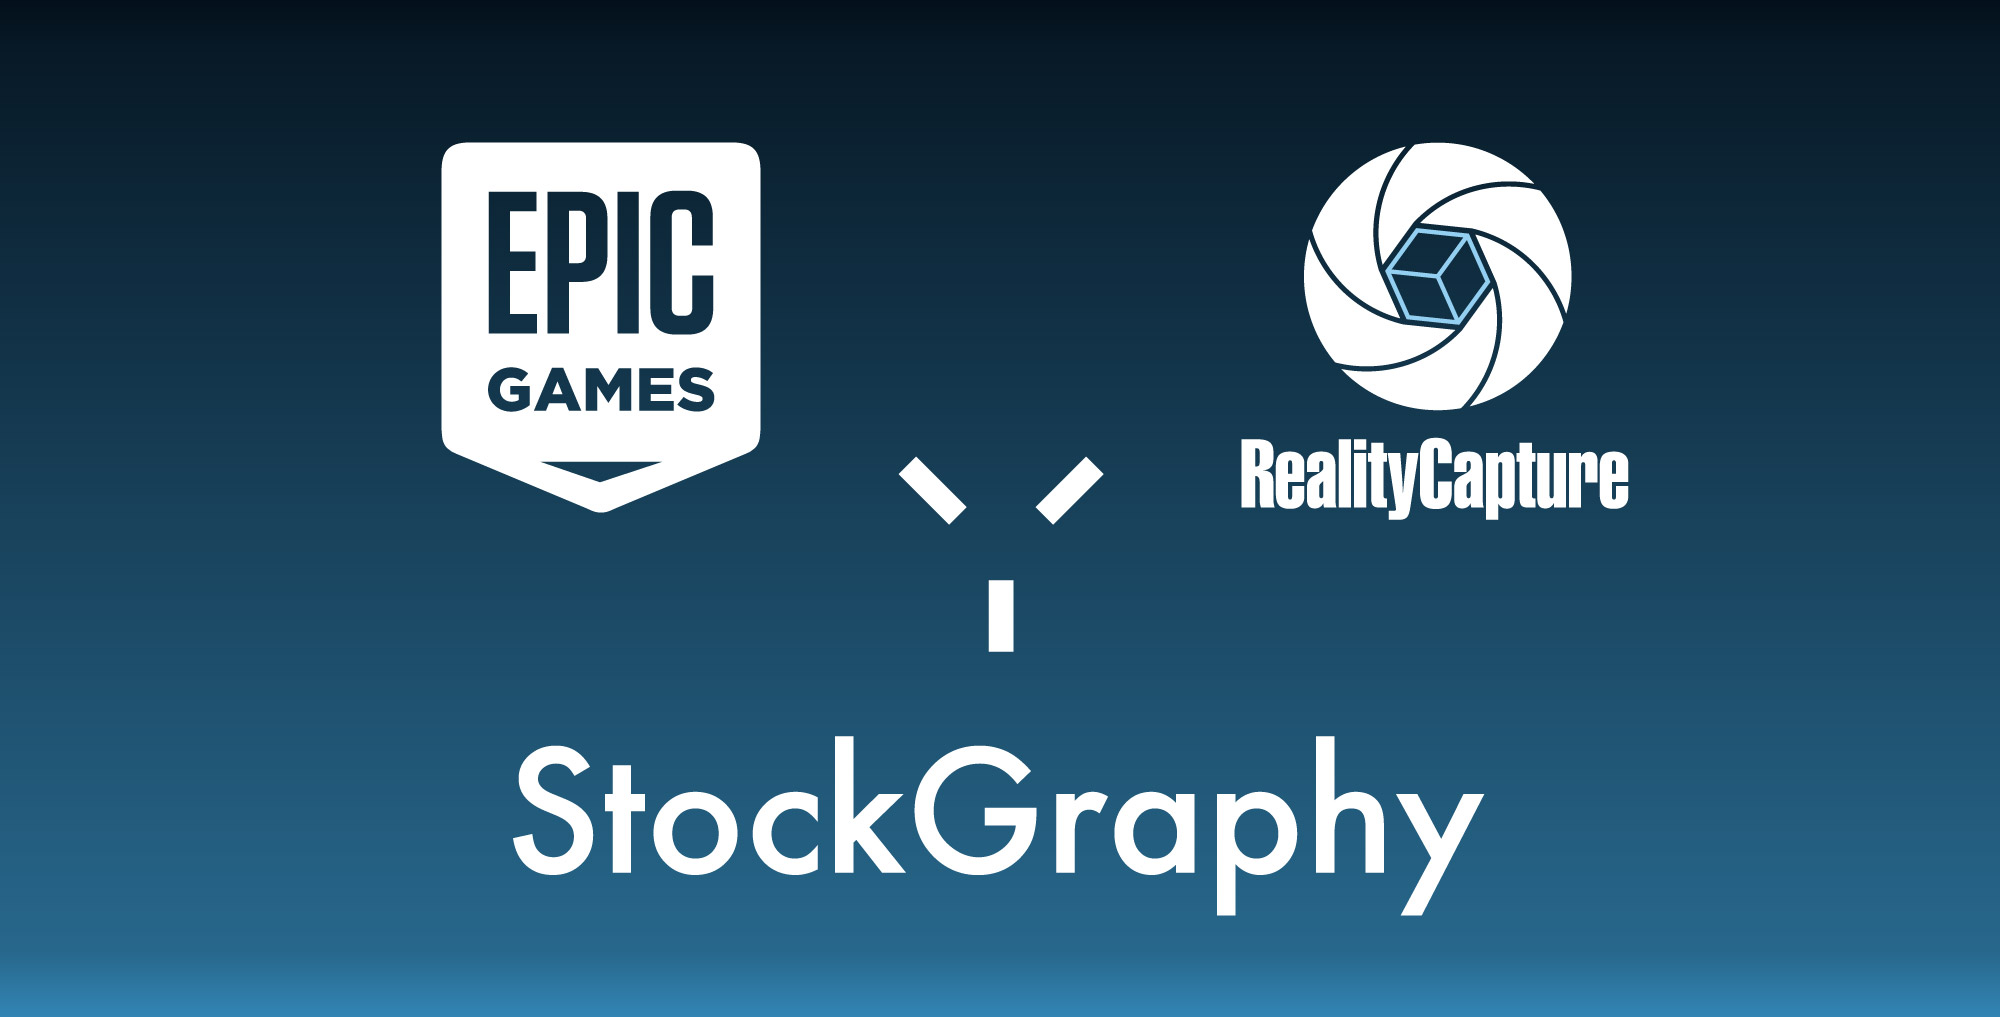 StockGraphy and Epic Games conclude reseller agreement of RealityCapture.